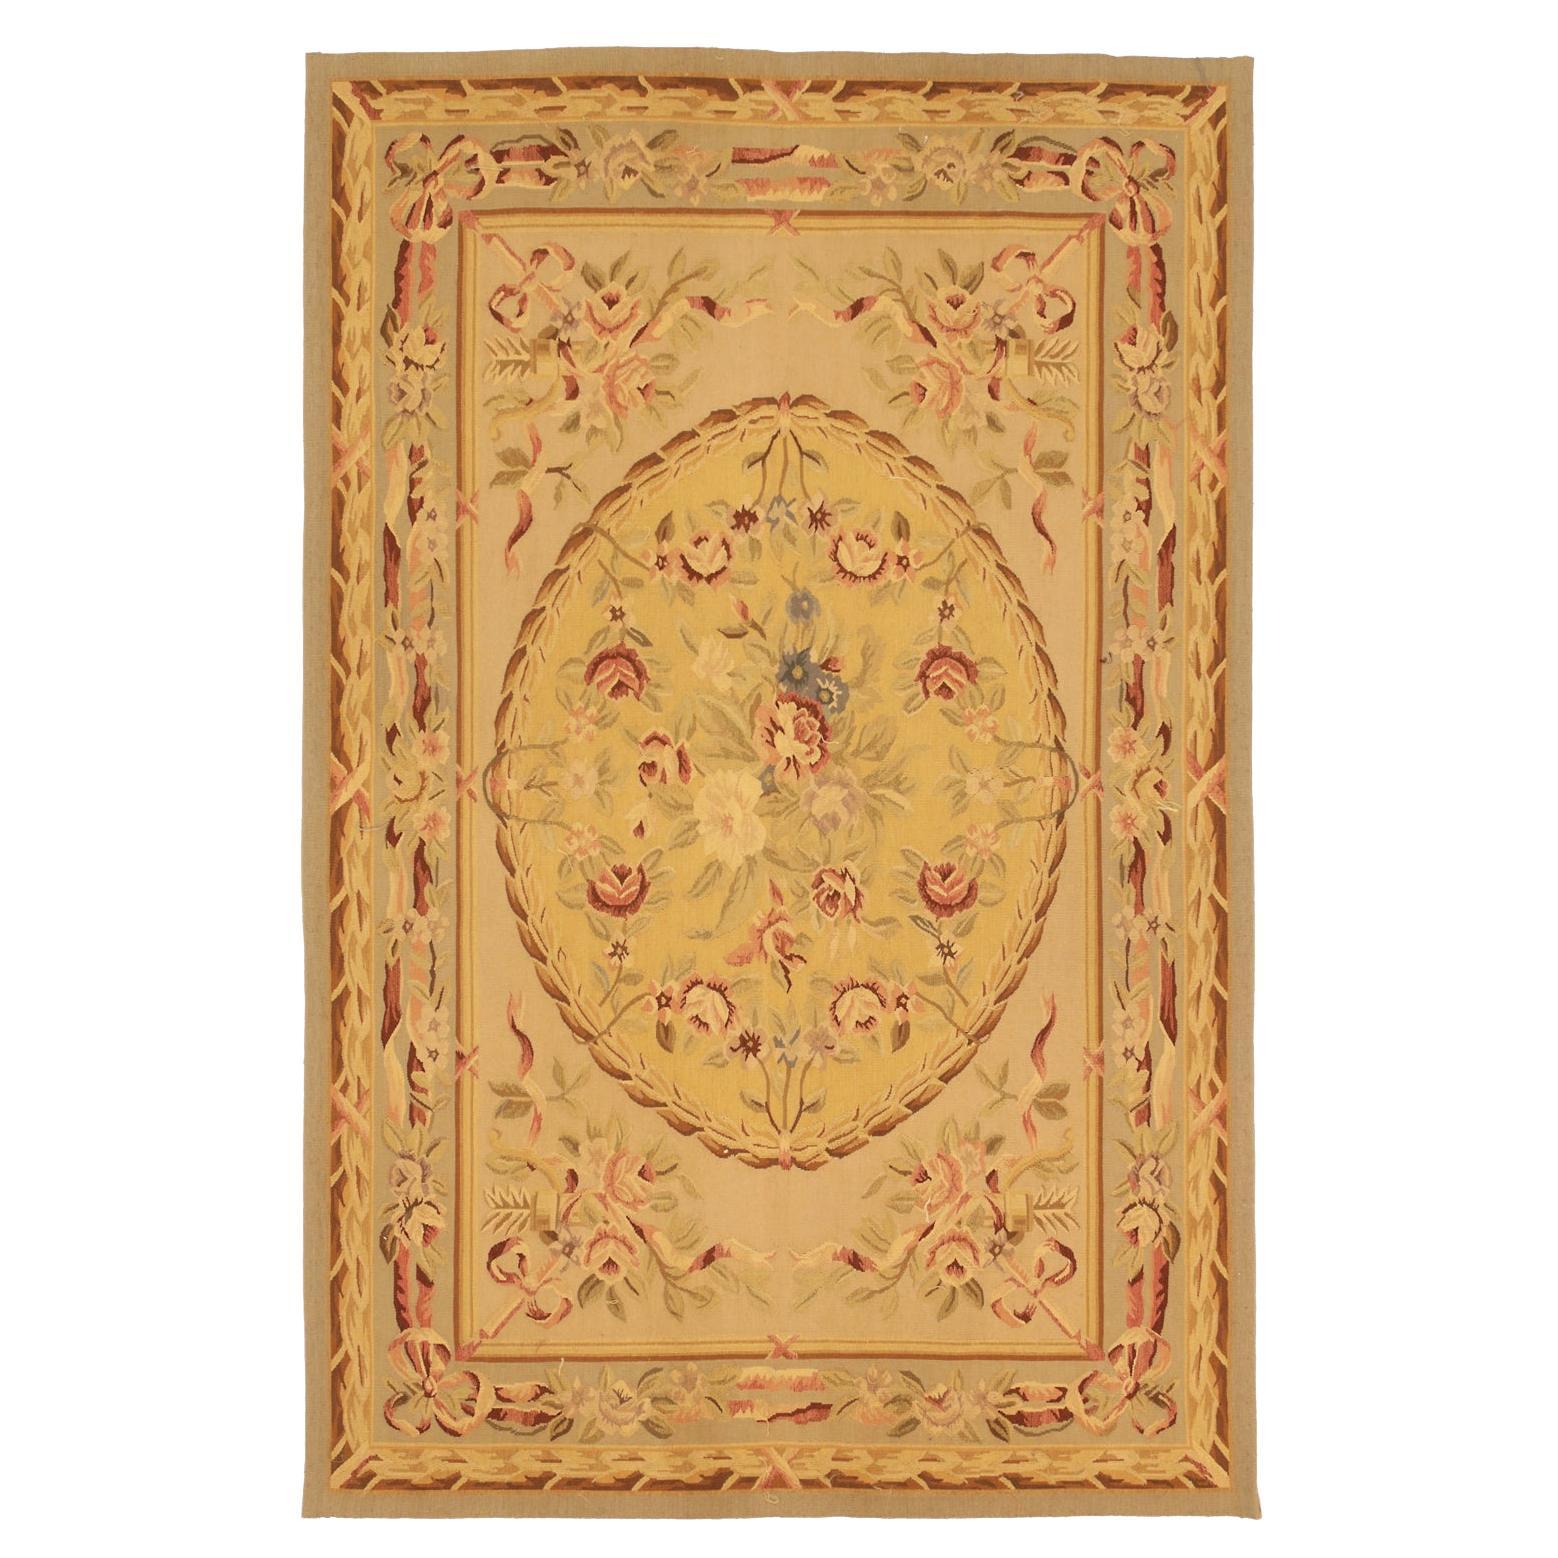 21st Century Aubusson French Style Design Flat-weave Rug